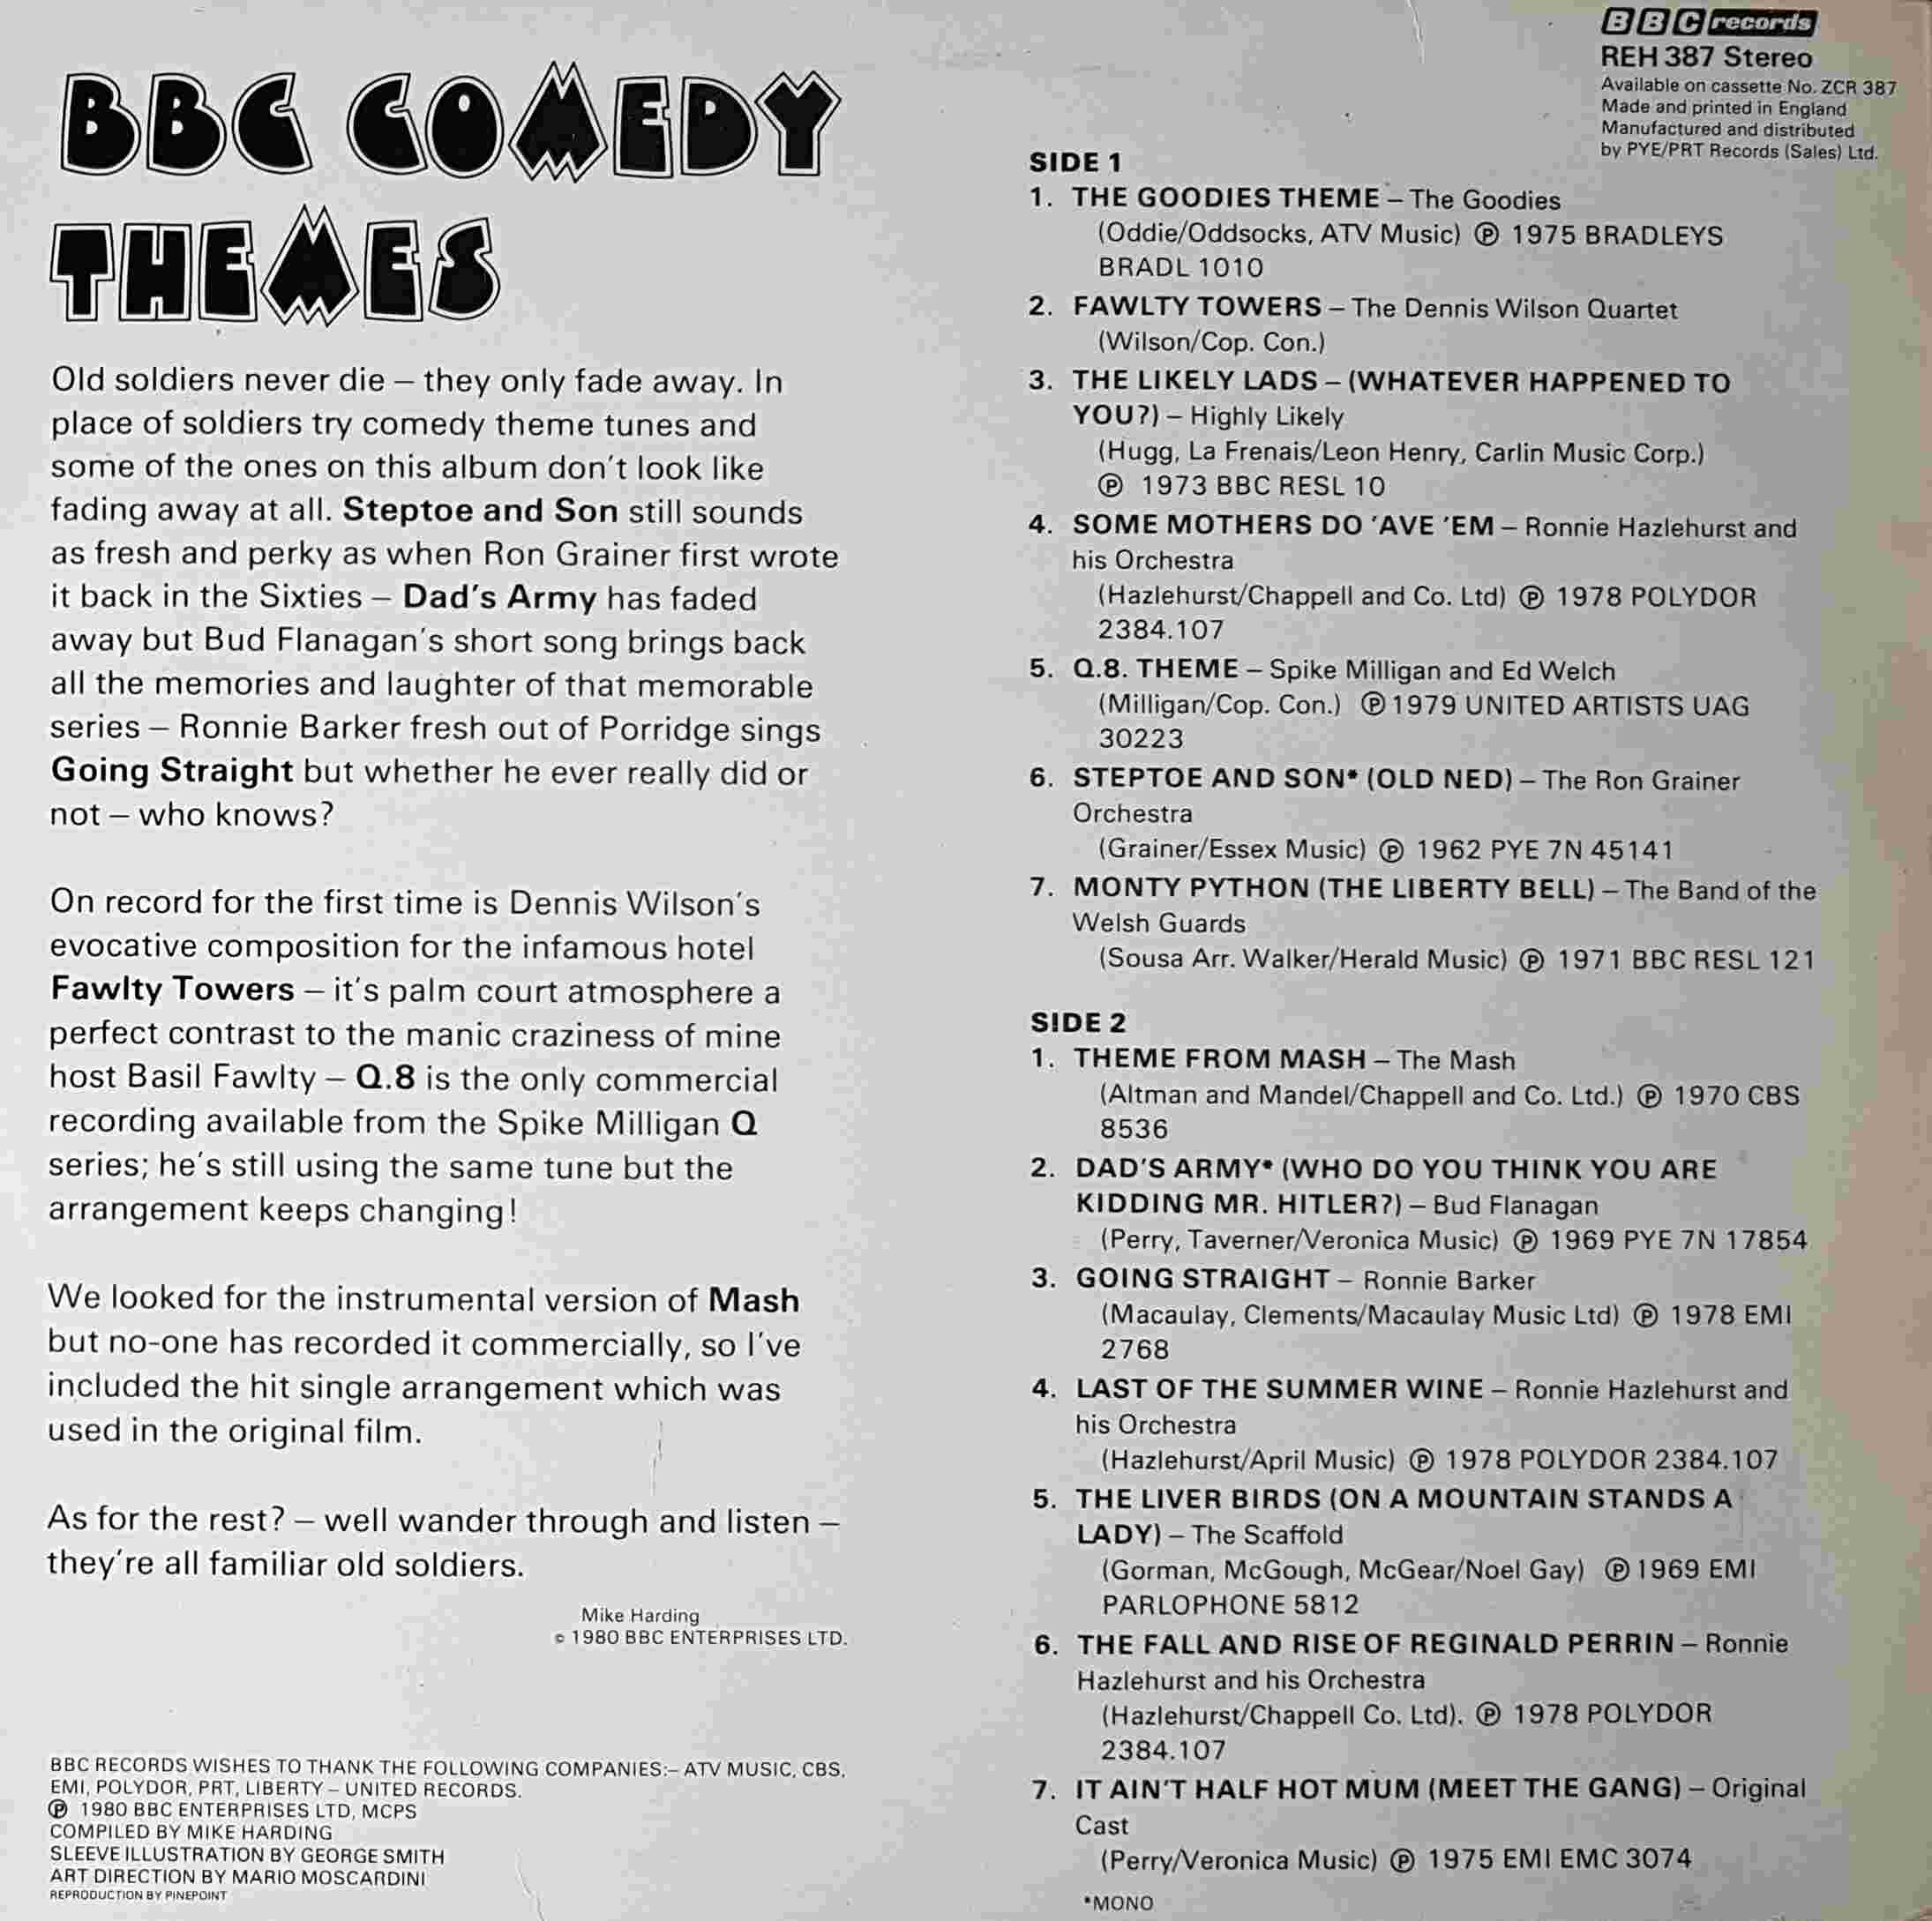 Picture of REH 387 BBC comedy themes by artist Various from the BBC records and Tapes library